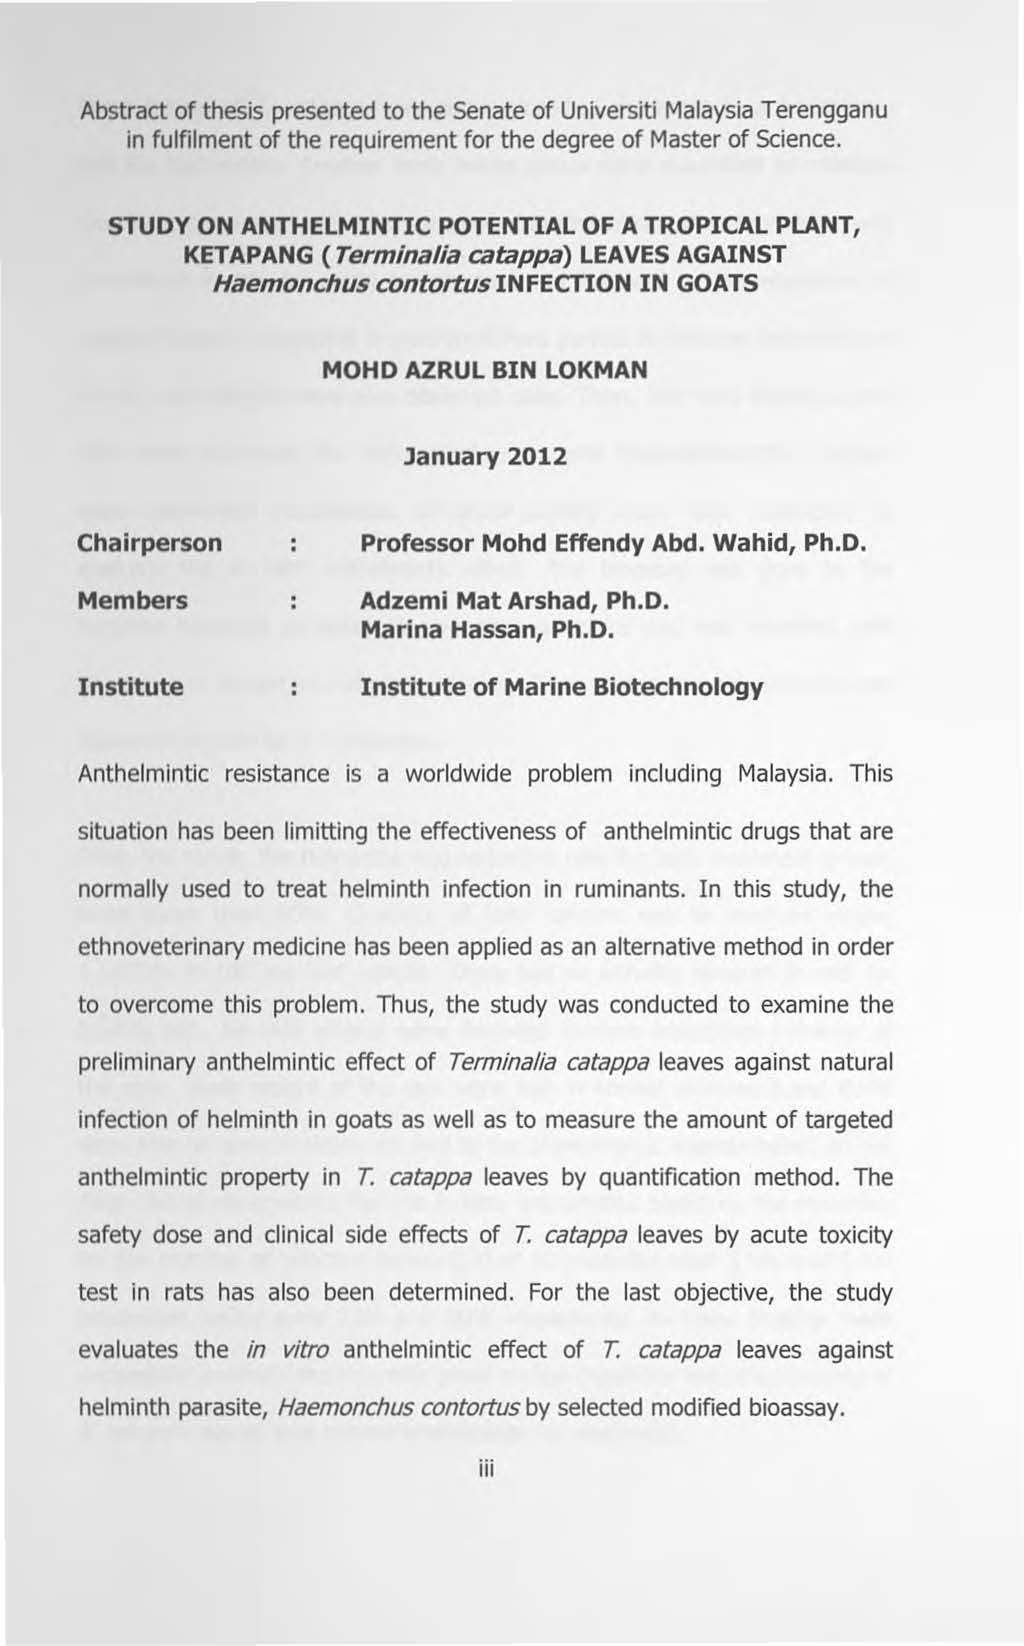 Abstract of thesis presented to the Senate of Universiti Malaysia Terengganu in fulfilment of the requirement for the degree of Master of Science.